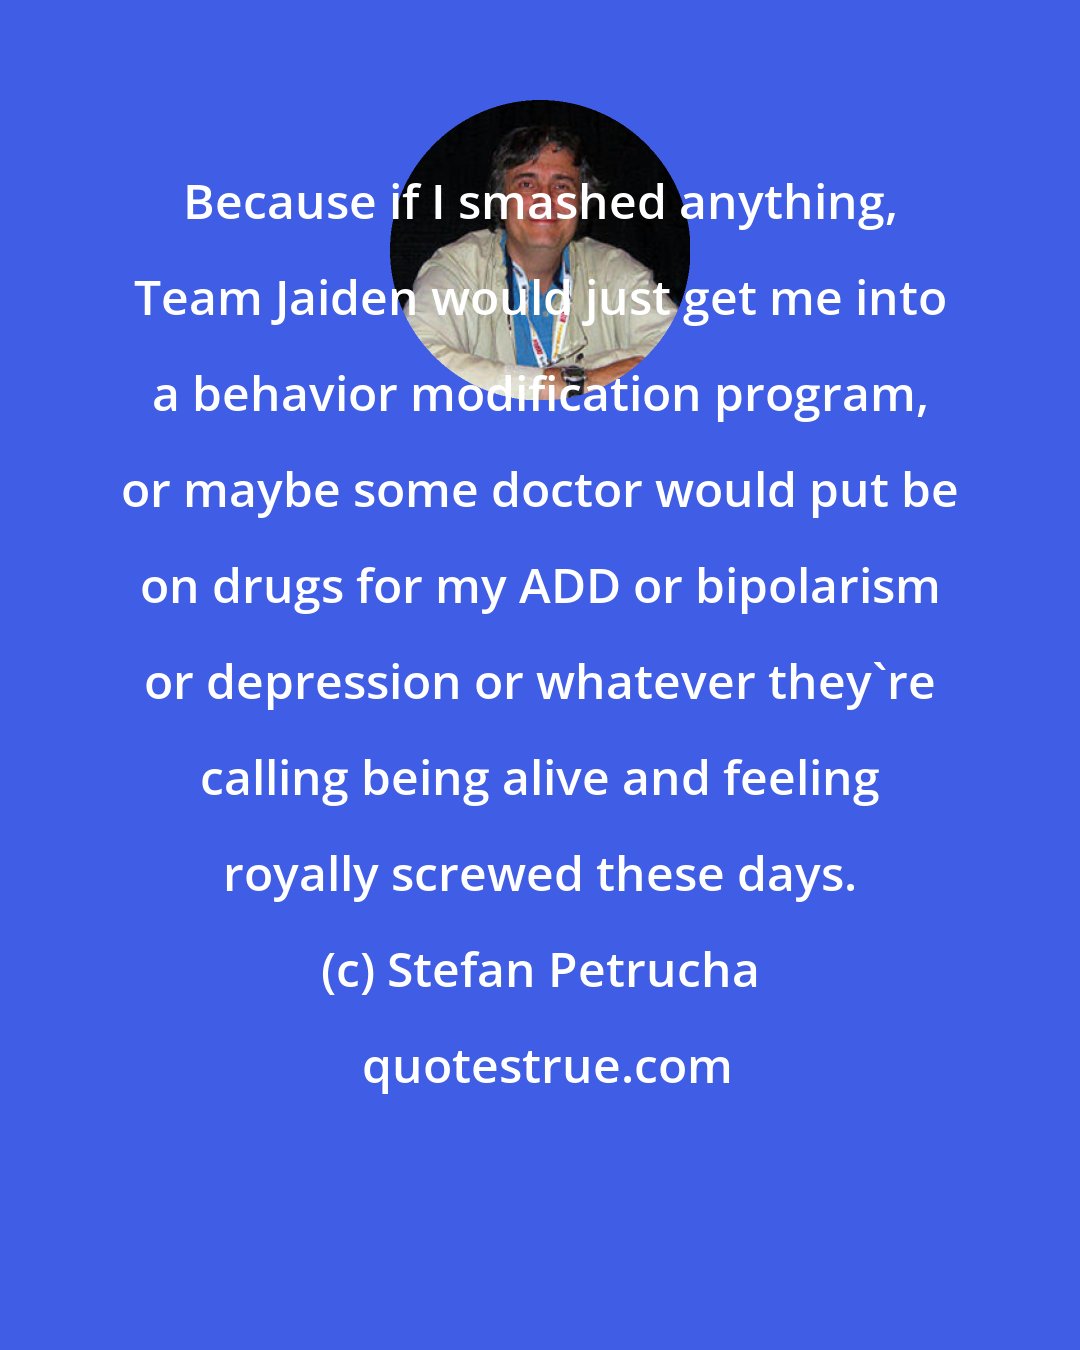 Stefan Petrucha: Because if I smashed anything, Team Jaiden would just get me into a behavior modification program, or maybe some doctor would put be on drugs for my ADD or bipolarism or depression or whatever they're calling being alive and feeling royally screwed these days.